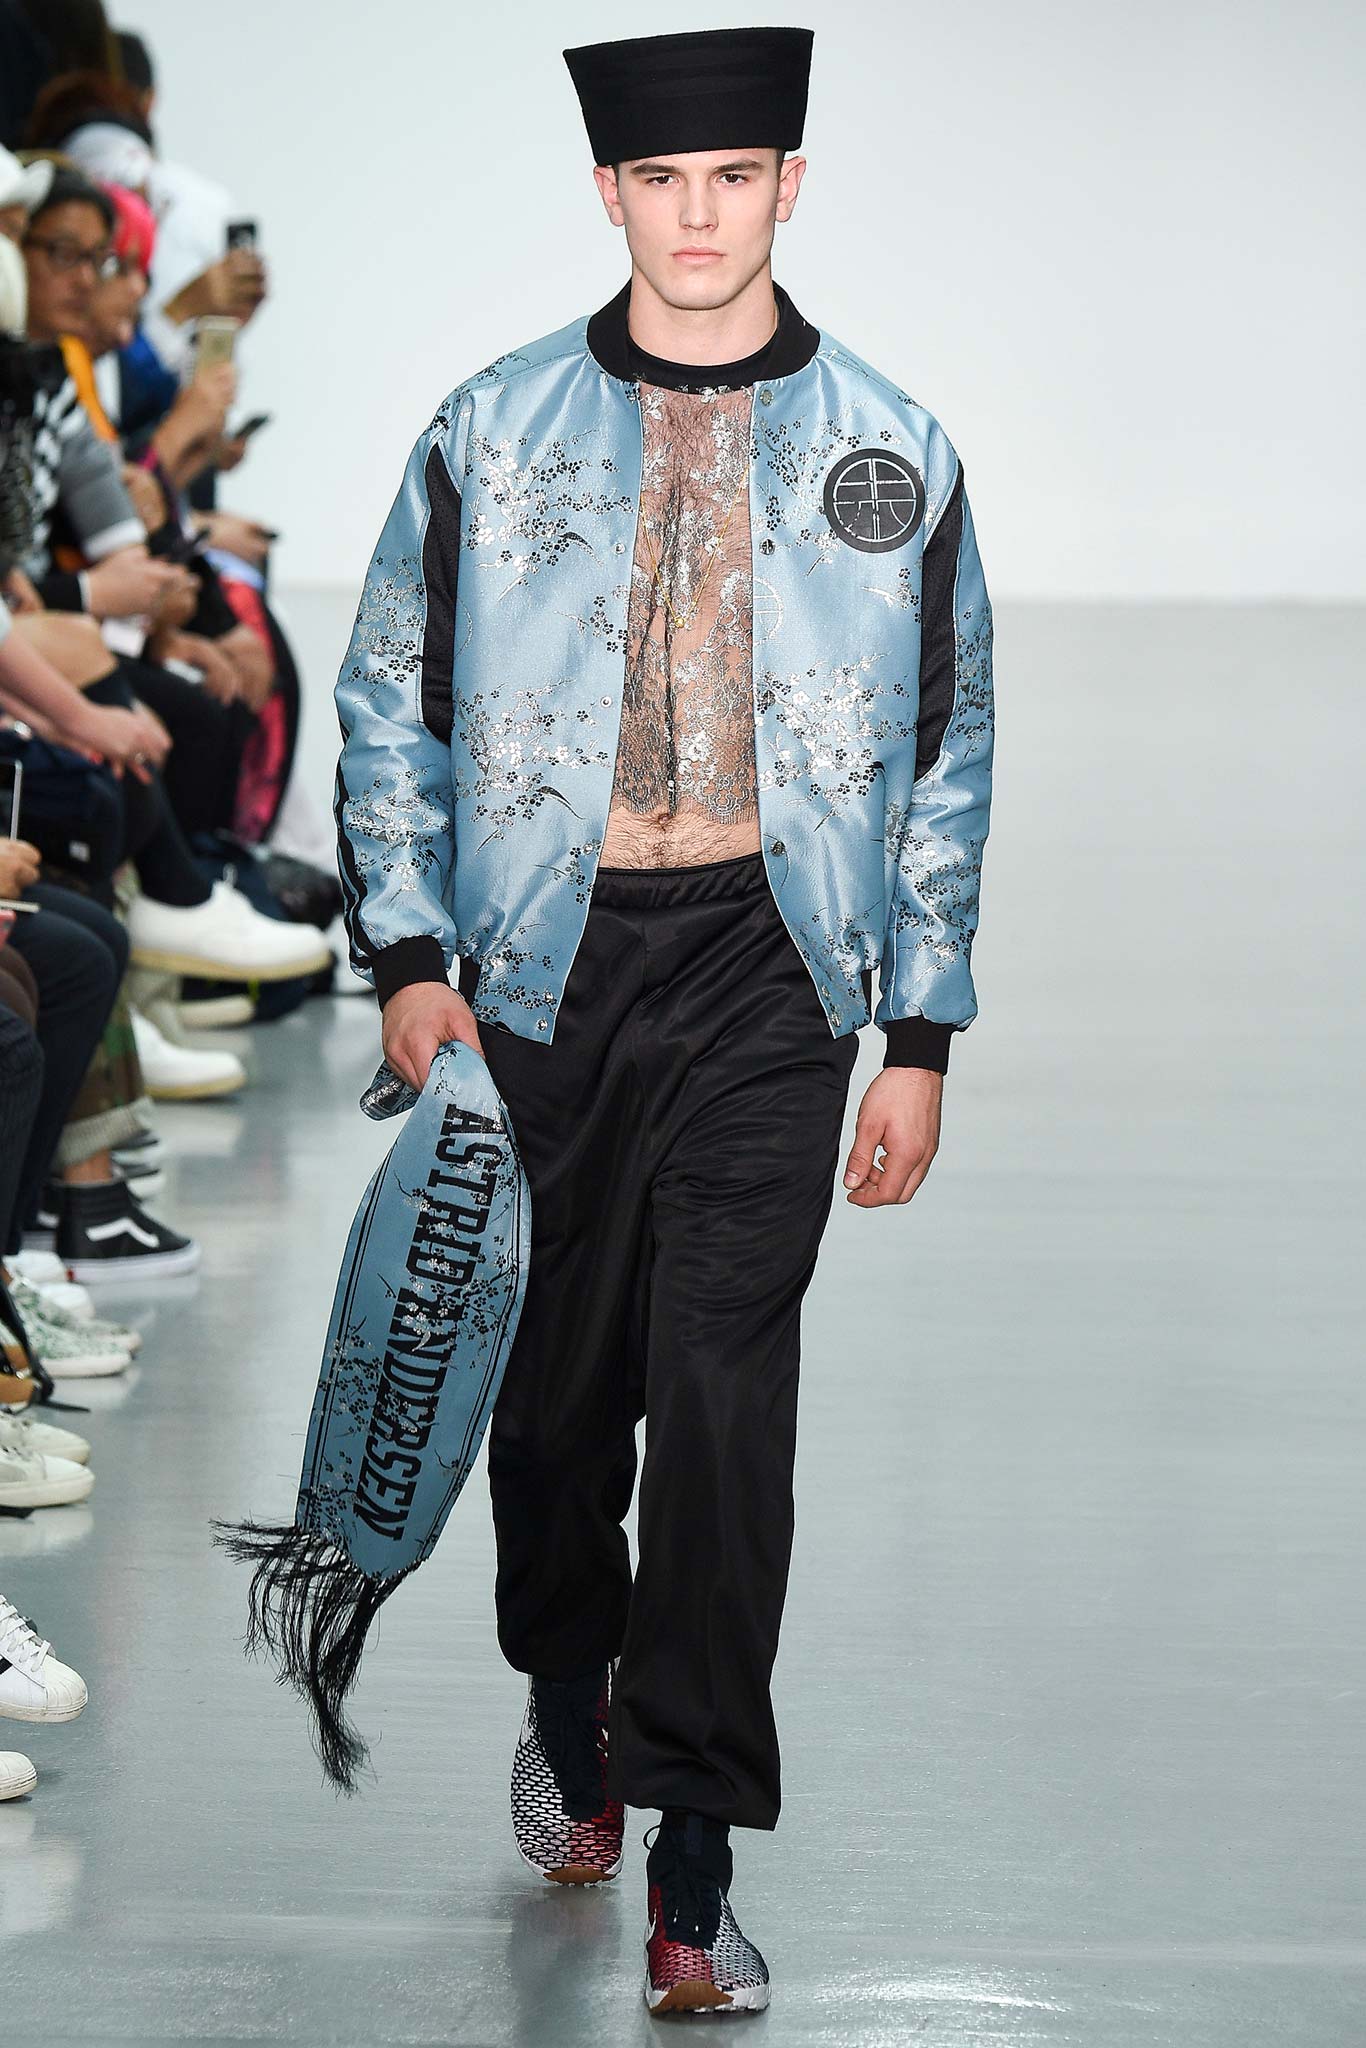 spring-2016-menswear-trends-07-chinoiserie-04